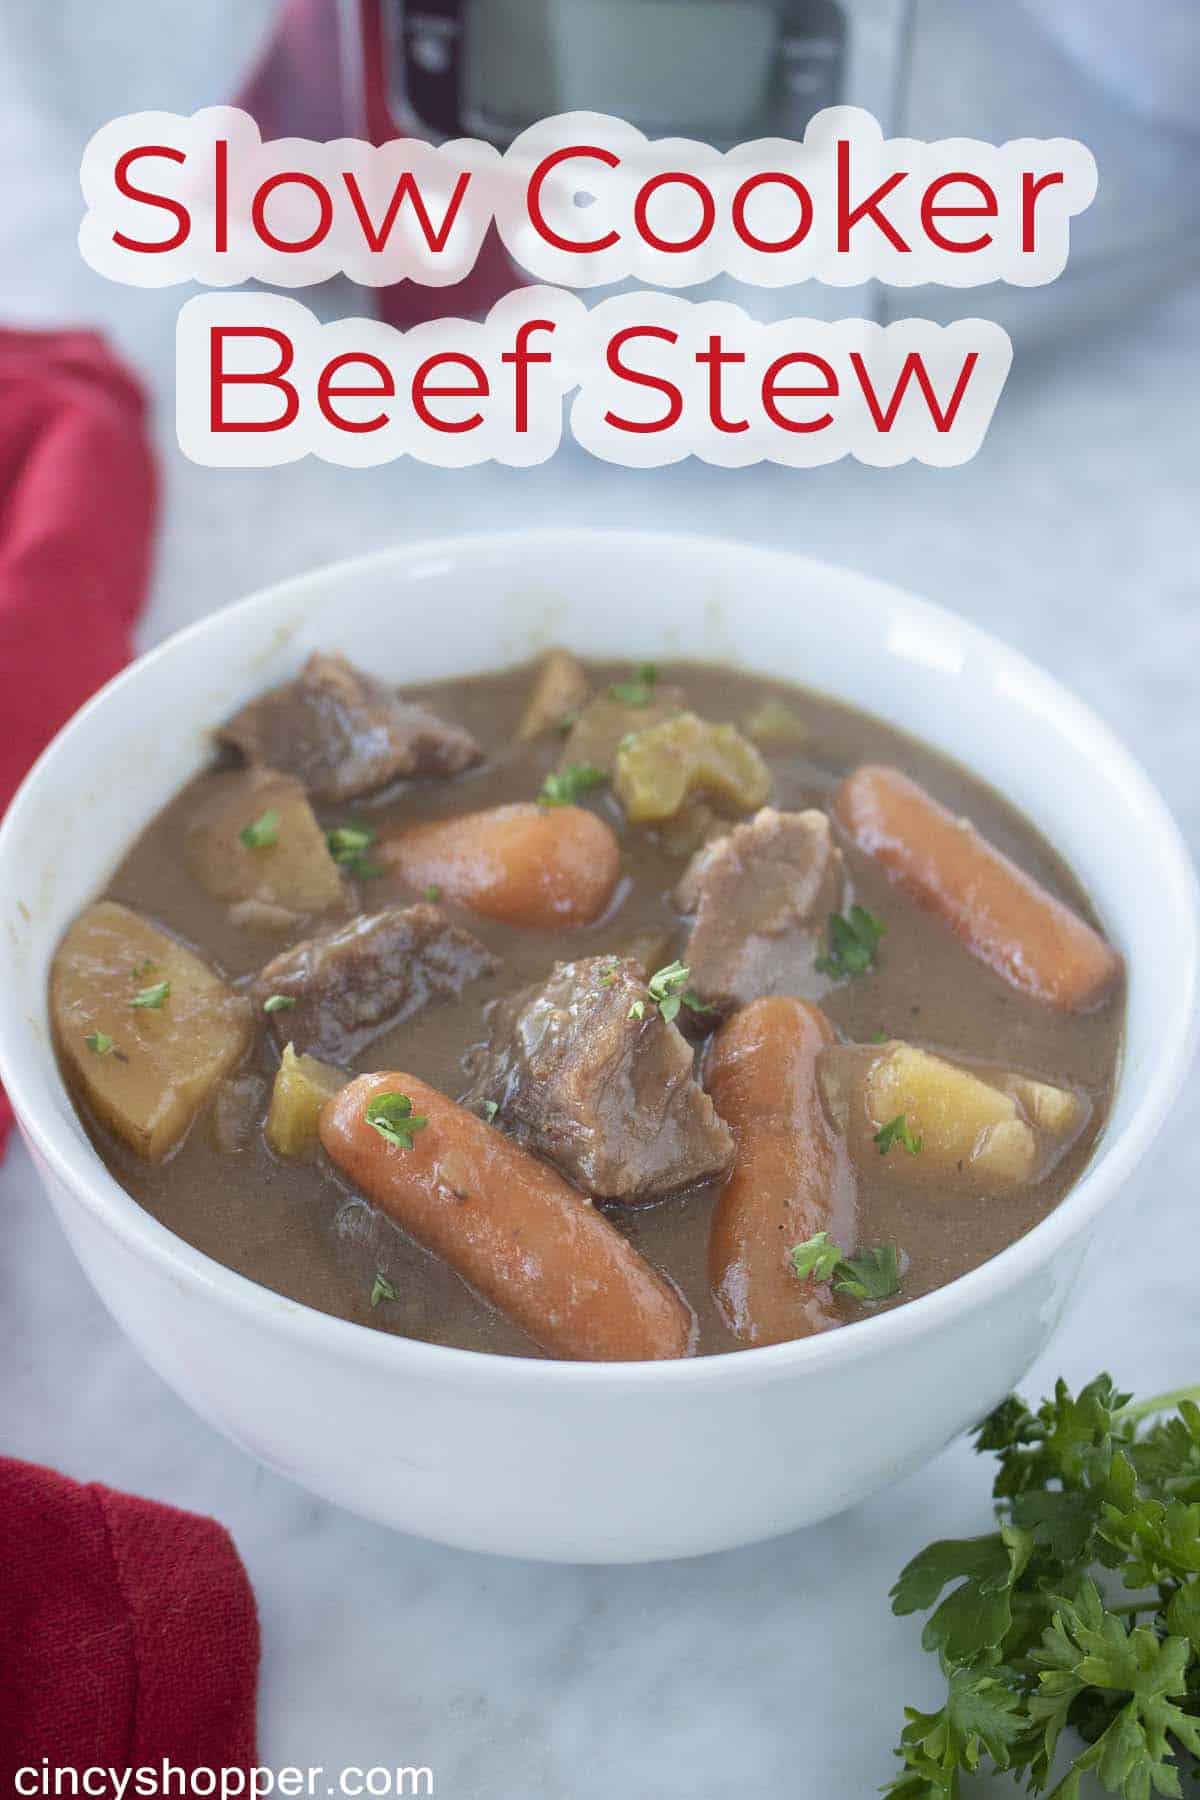 Text on image Slow Cooker Beef Stew.